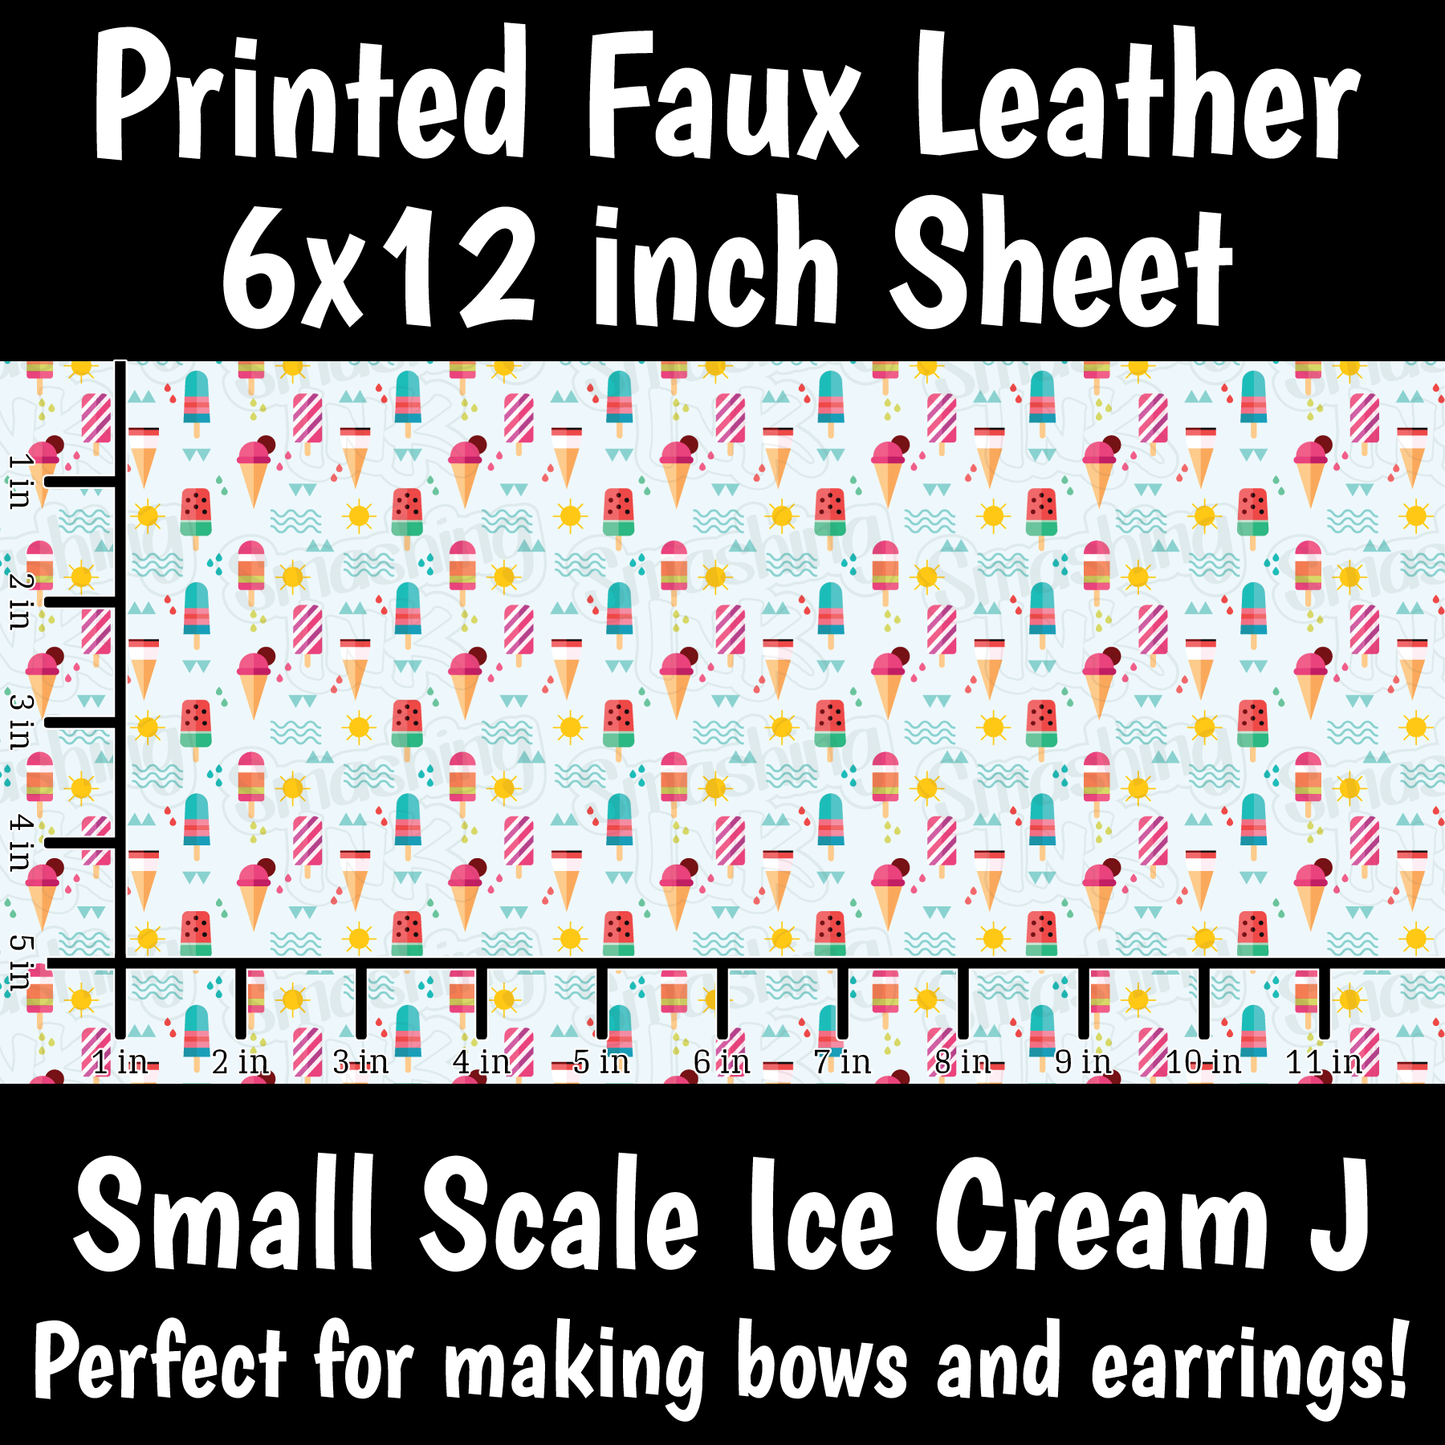 Small Scale Ice Cream J - Faux Leather Sheet (SHIPS IN 3 BUS DAYS)